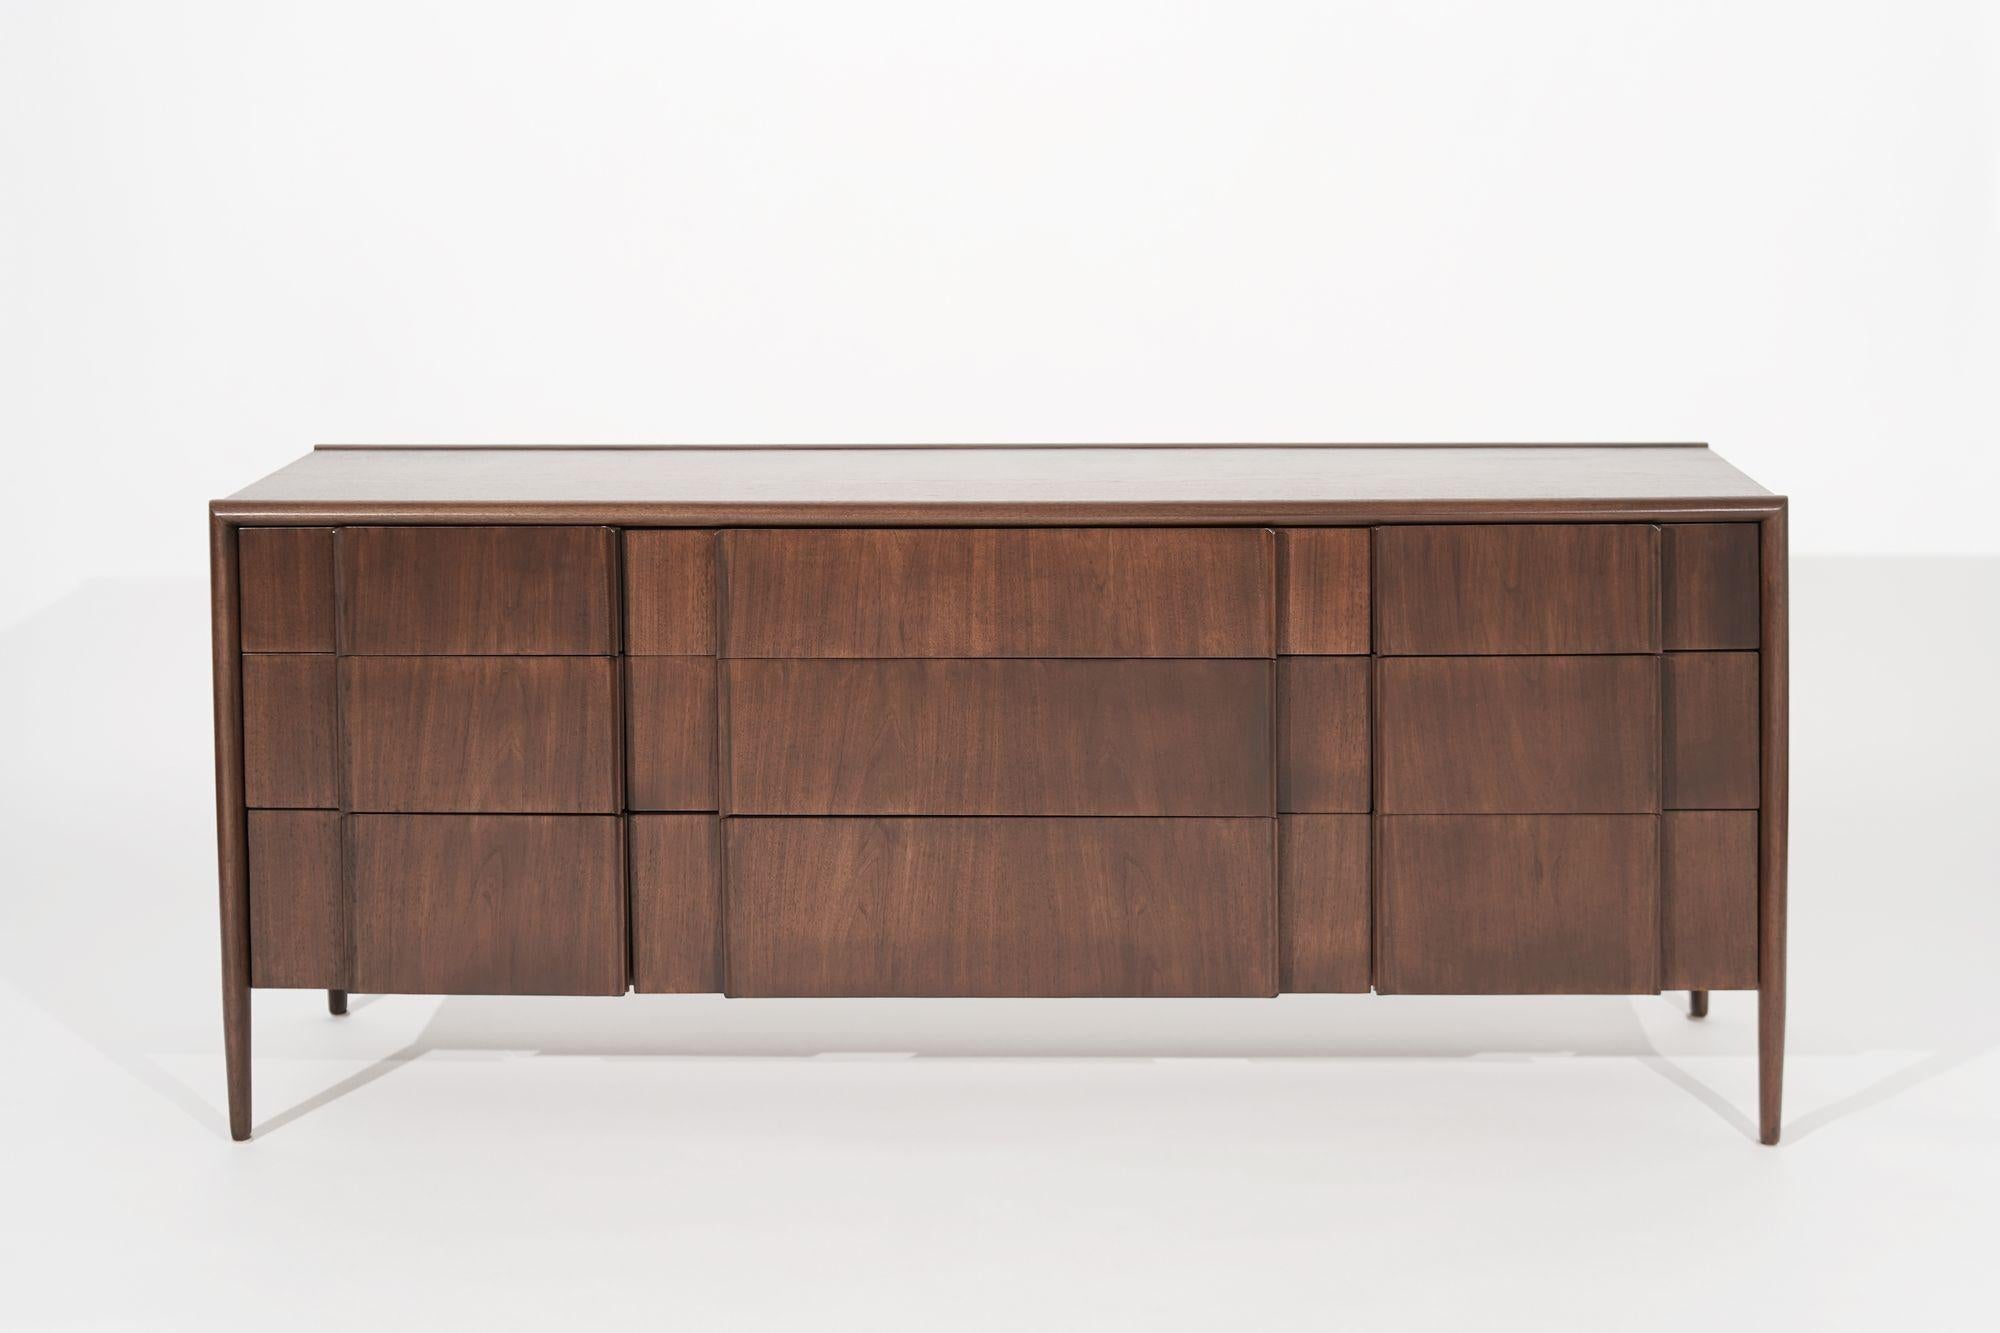 A dresser executed in walnut by Drexel Furniture, circa 1950-1959. An all-around very handsome design featuring Dual drawers with wood drawer pulls. Completely restored by the professional team of Stamford Modern. 
 
Other designers from this era